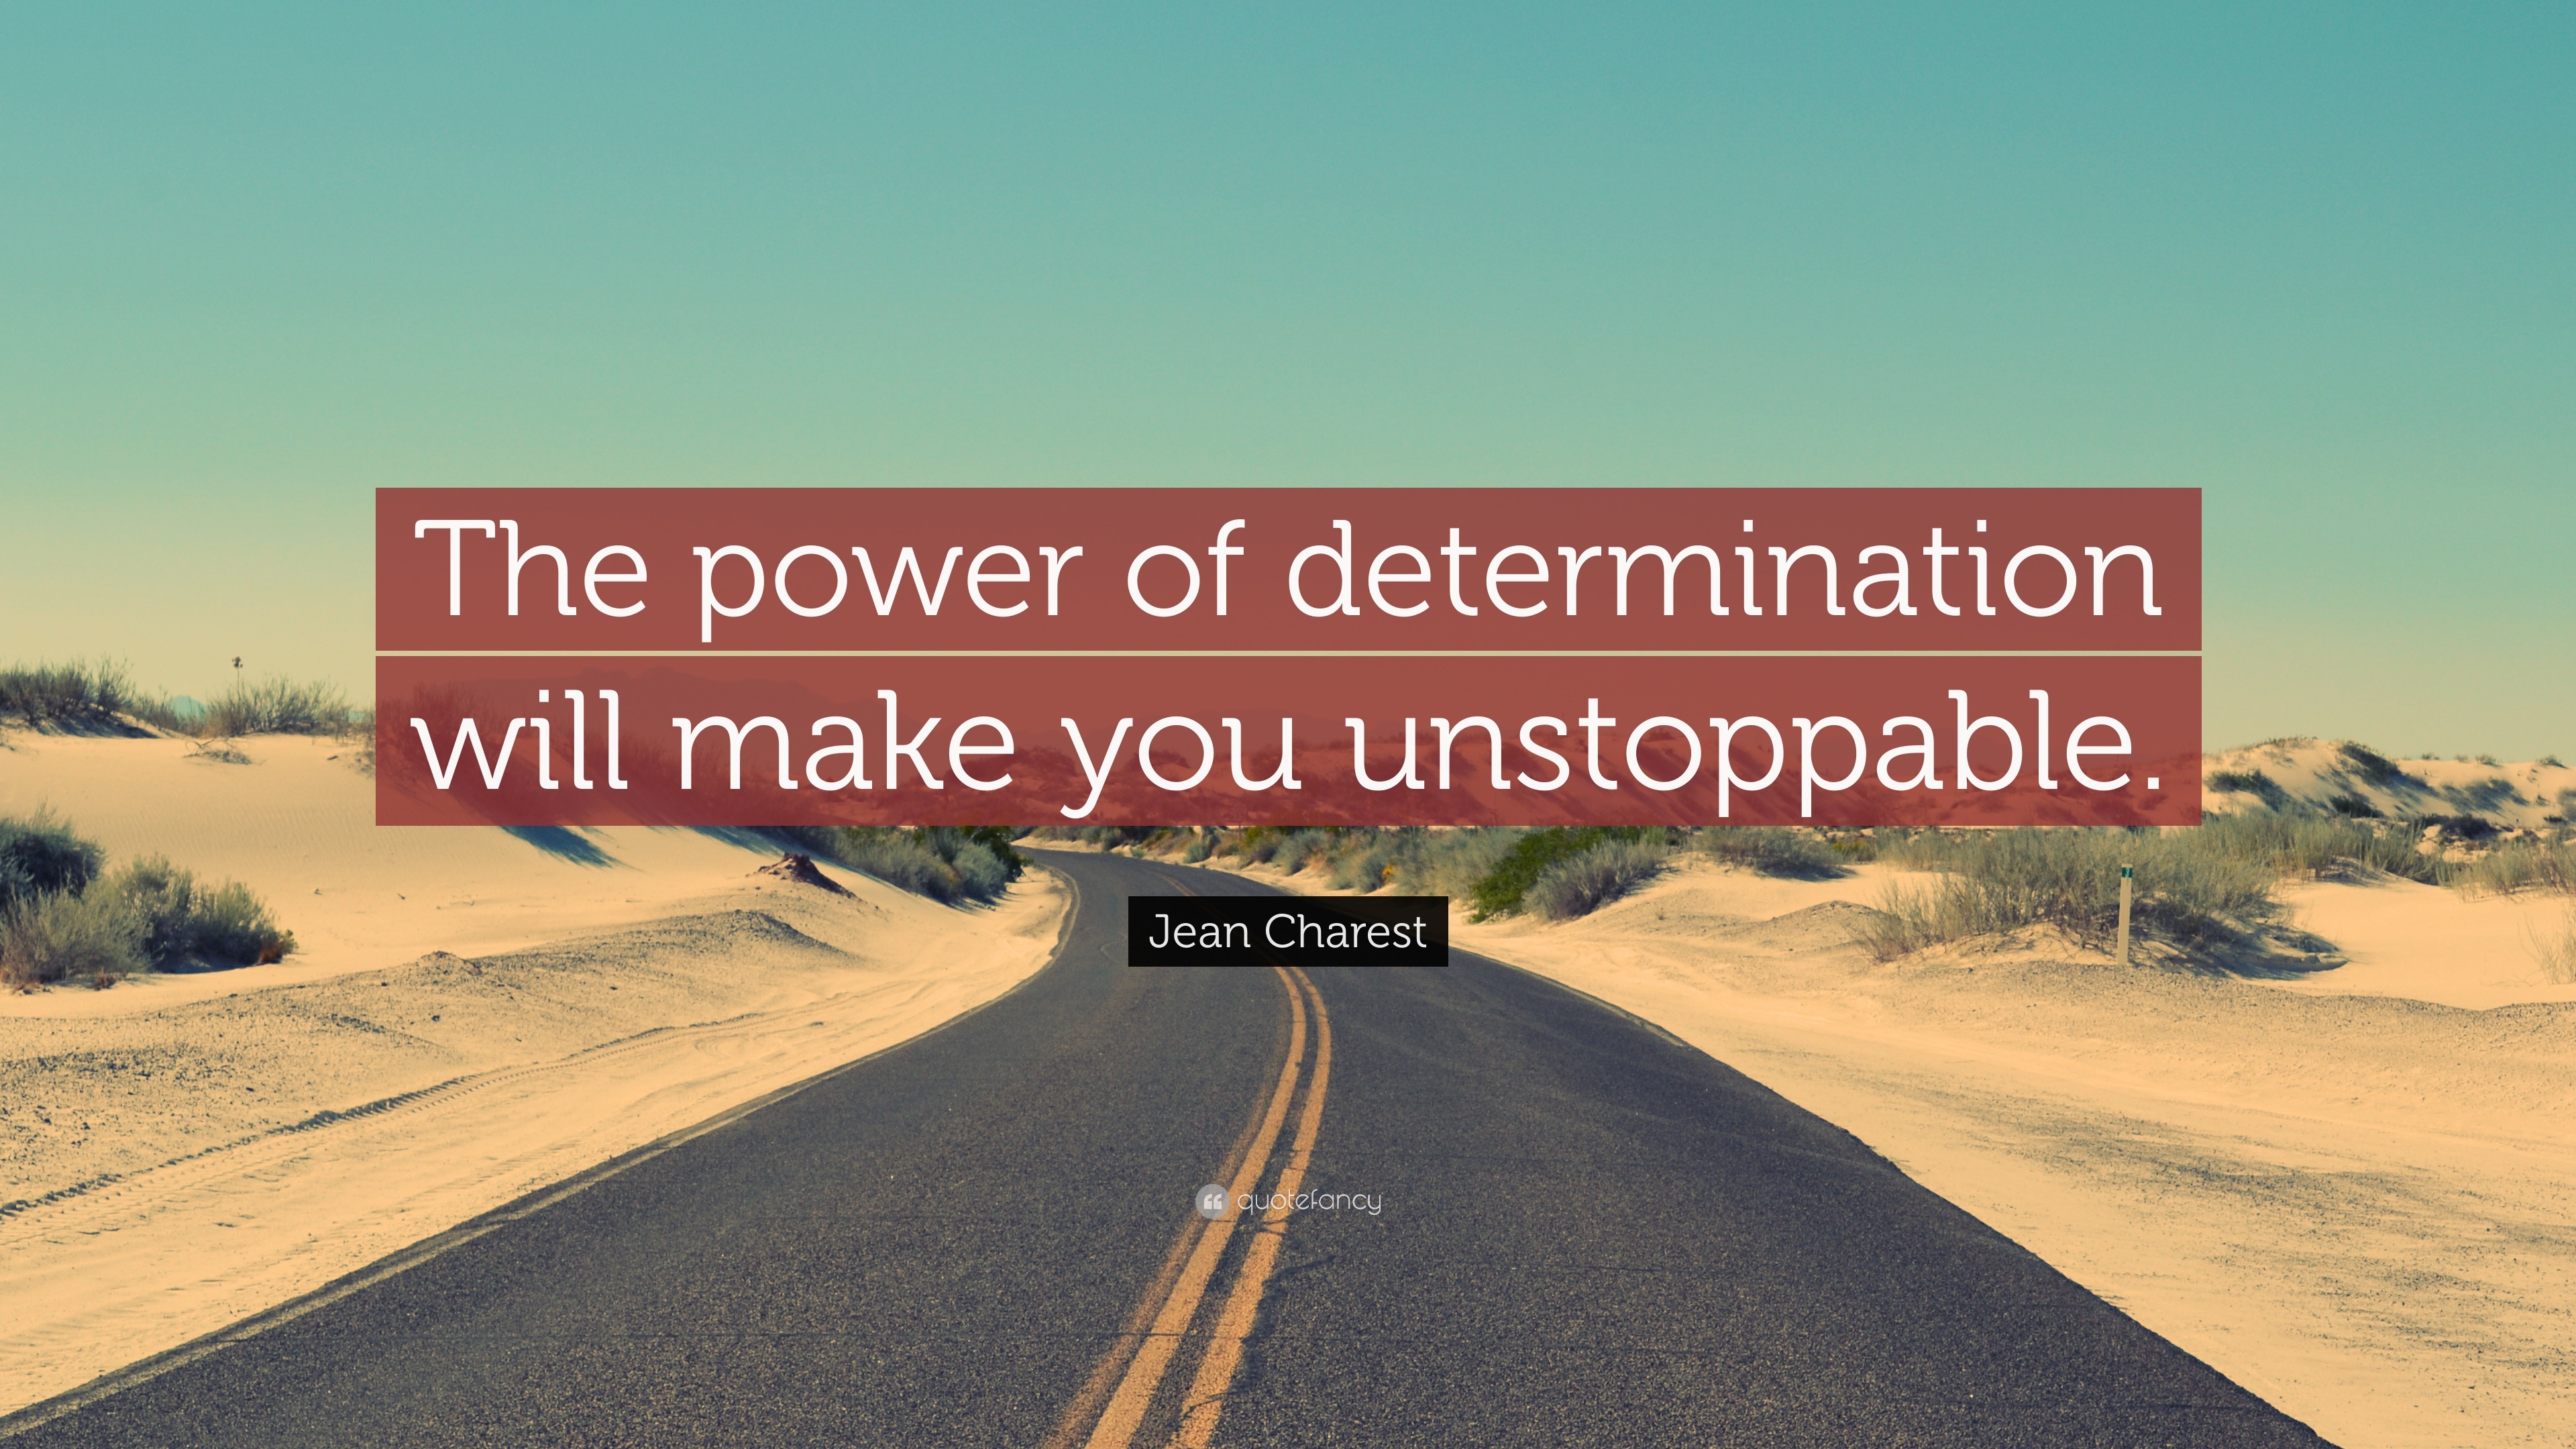 Jean Charest Quote: “The power of determination will make you unstoppable.”